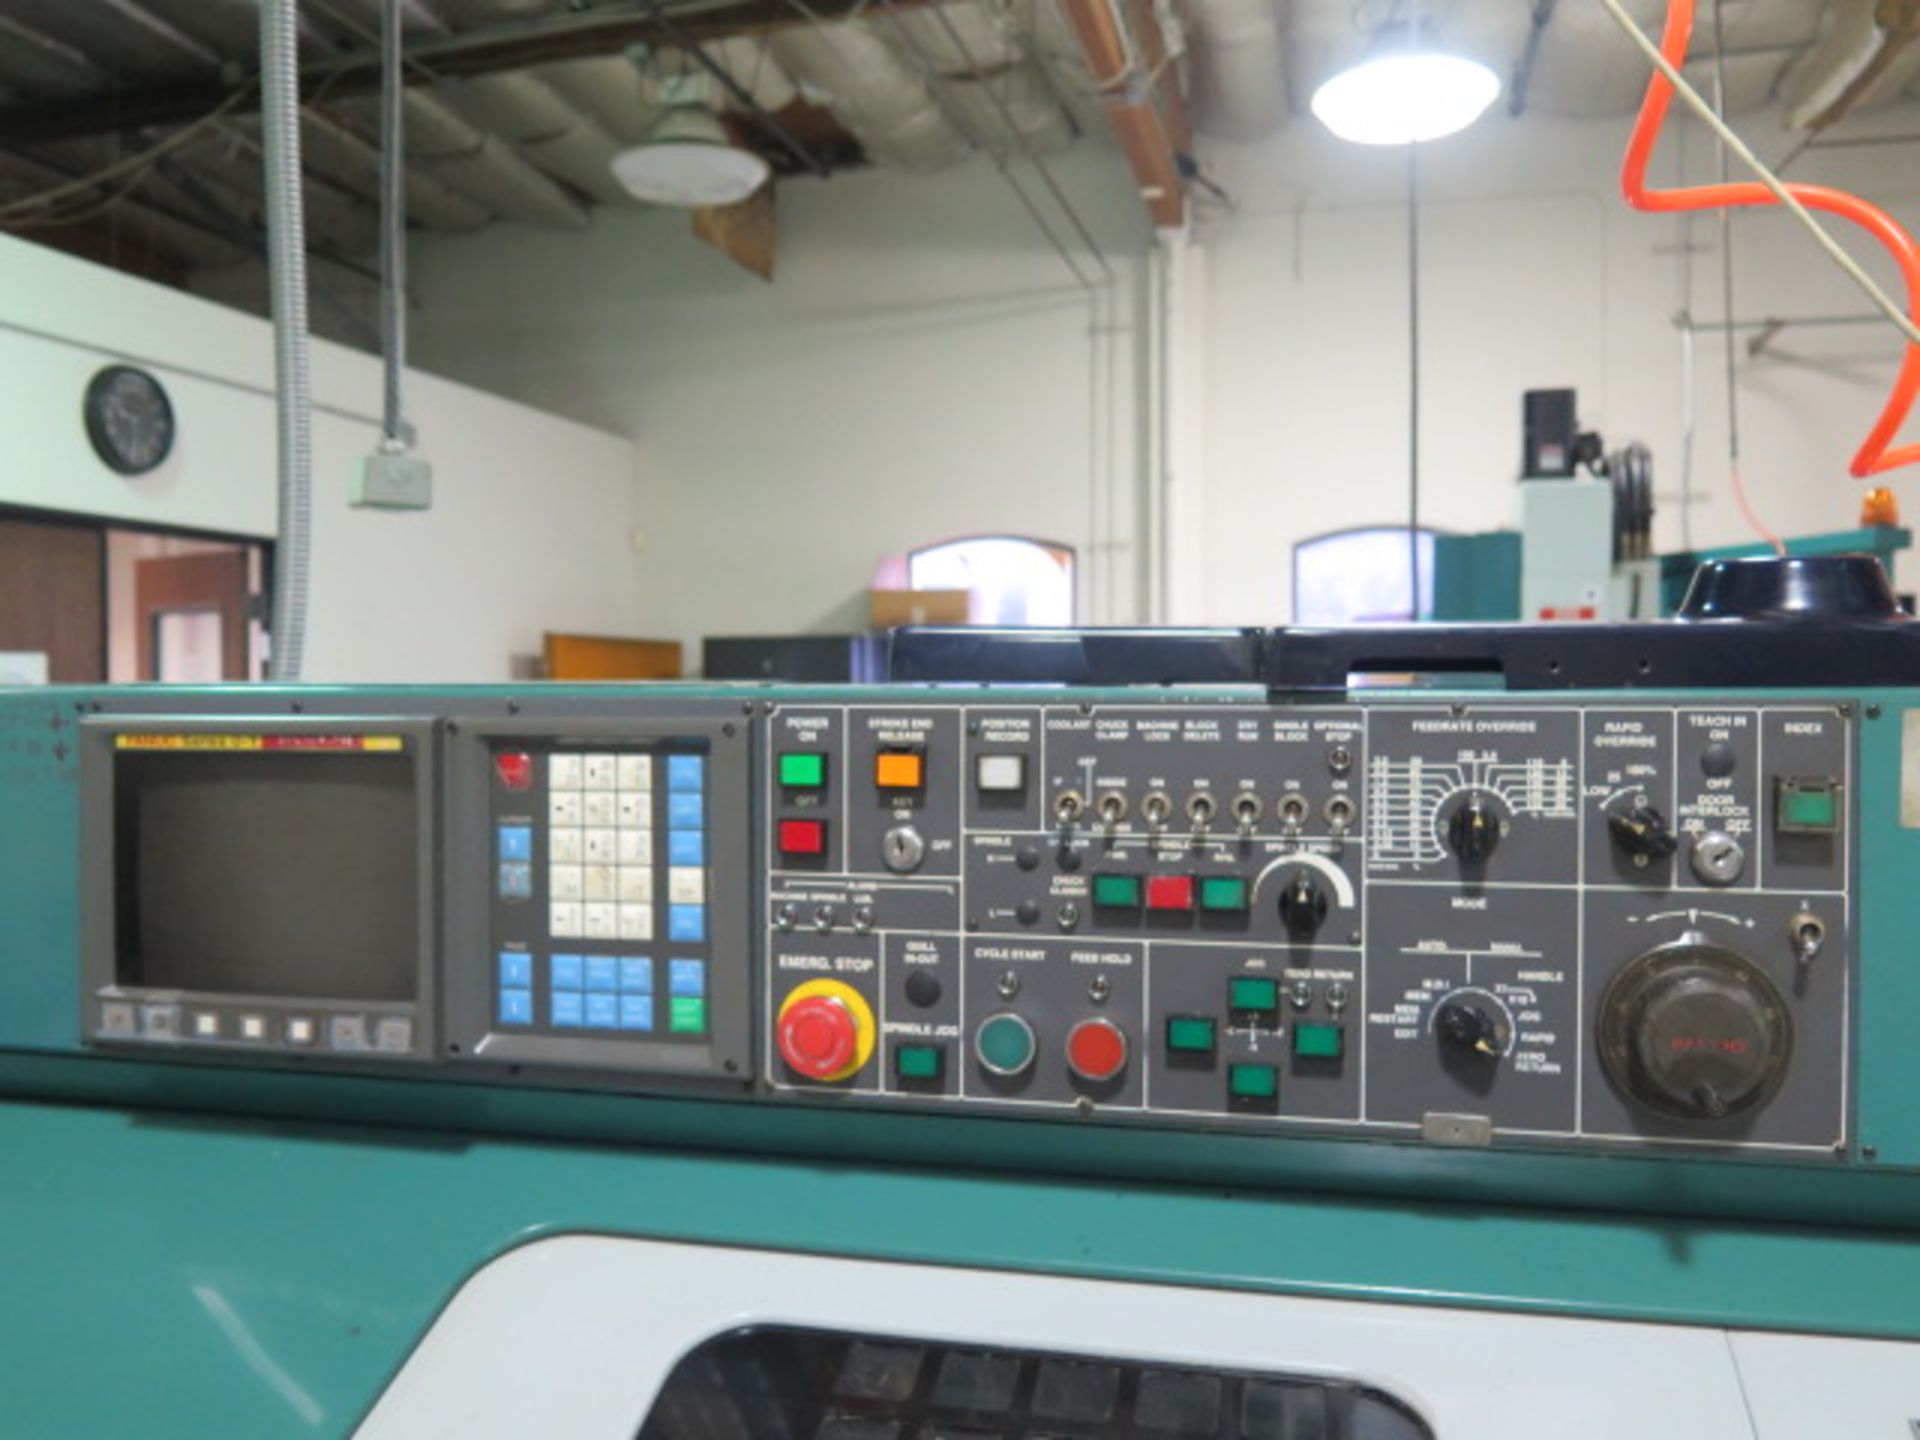 1996 Nakamura Tome TMC-15 CNC Turning Center s/n E04904 w/ Fanuc Series 0-T Controls, 10-Station - Image 8 of 10